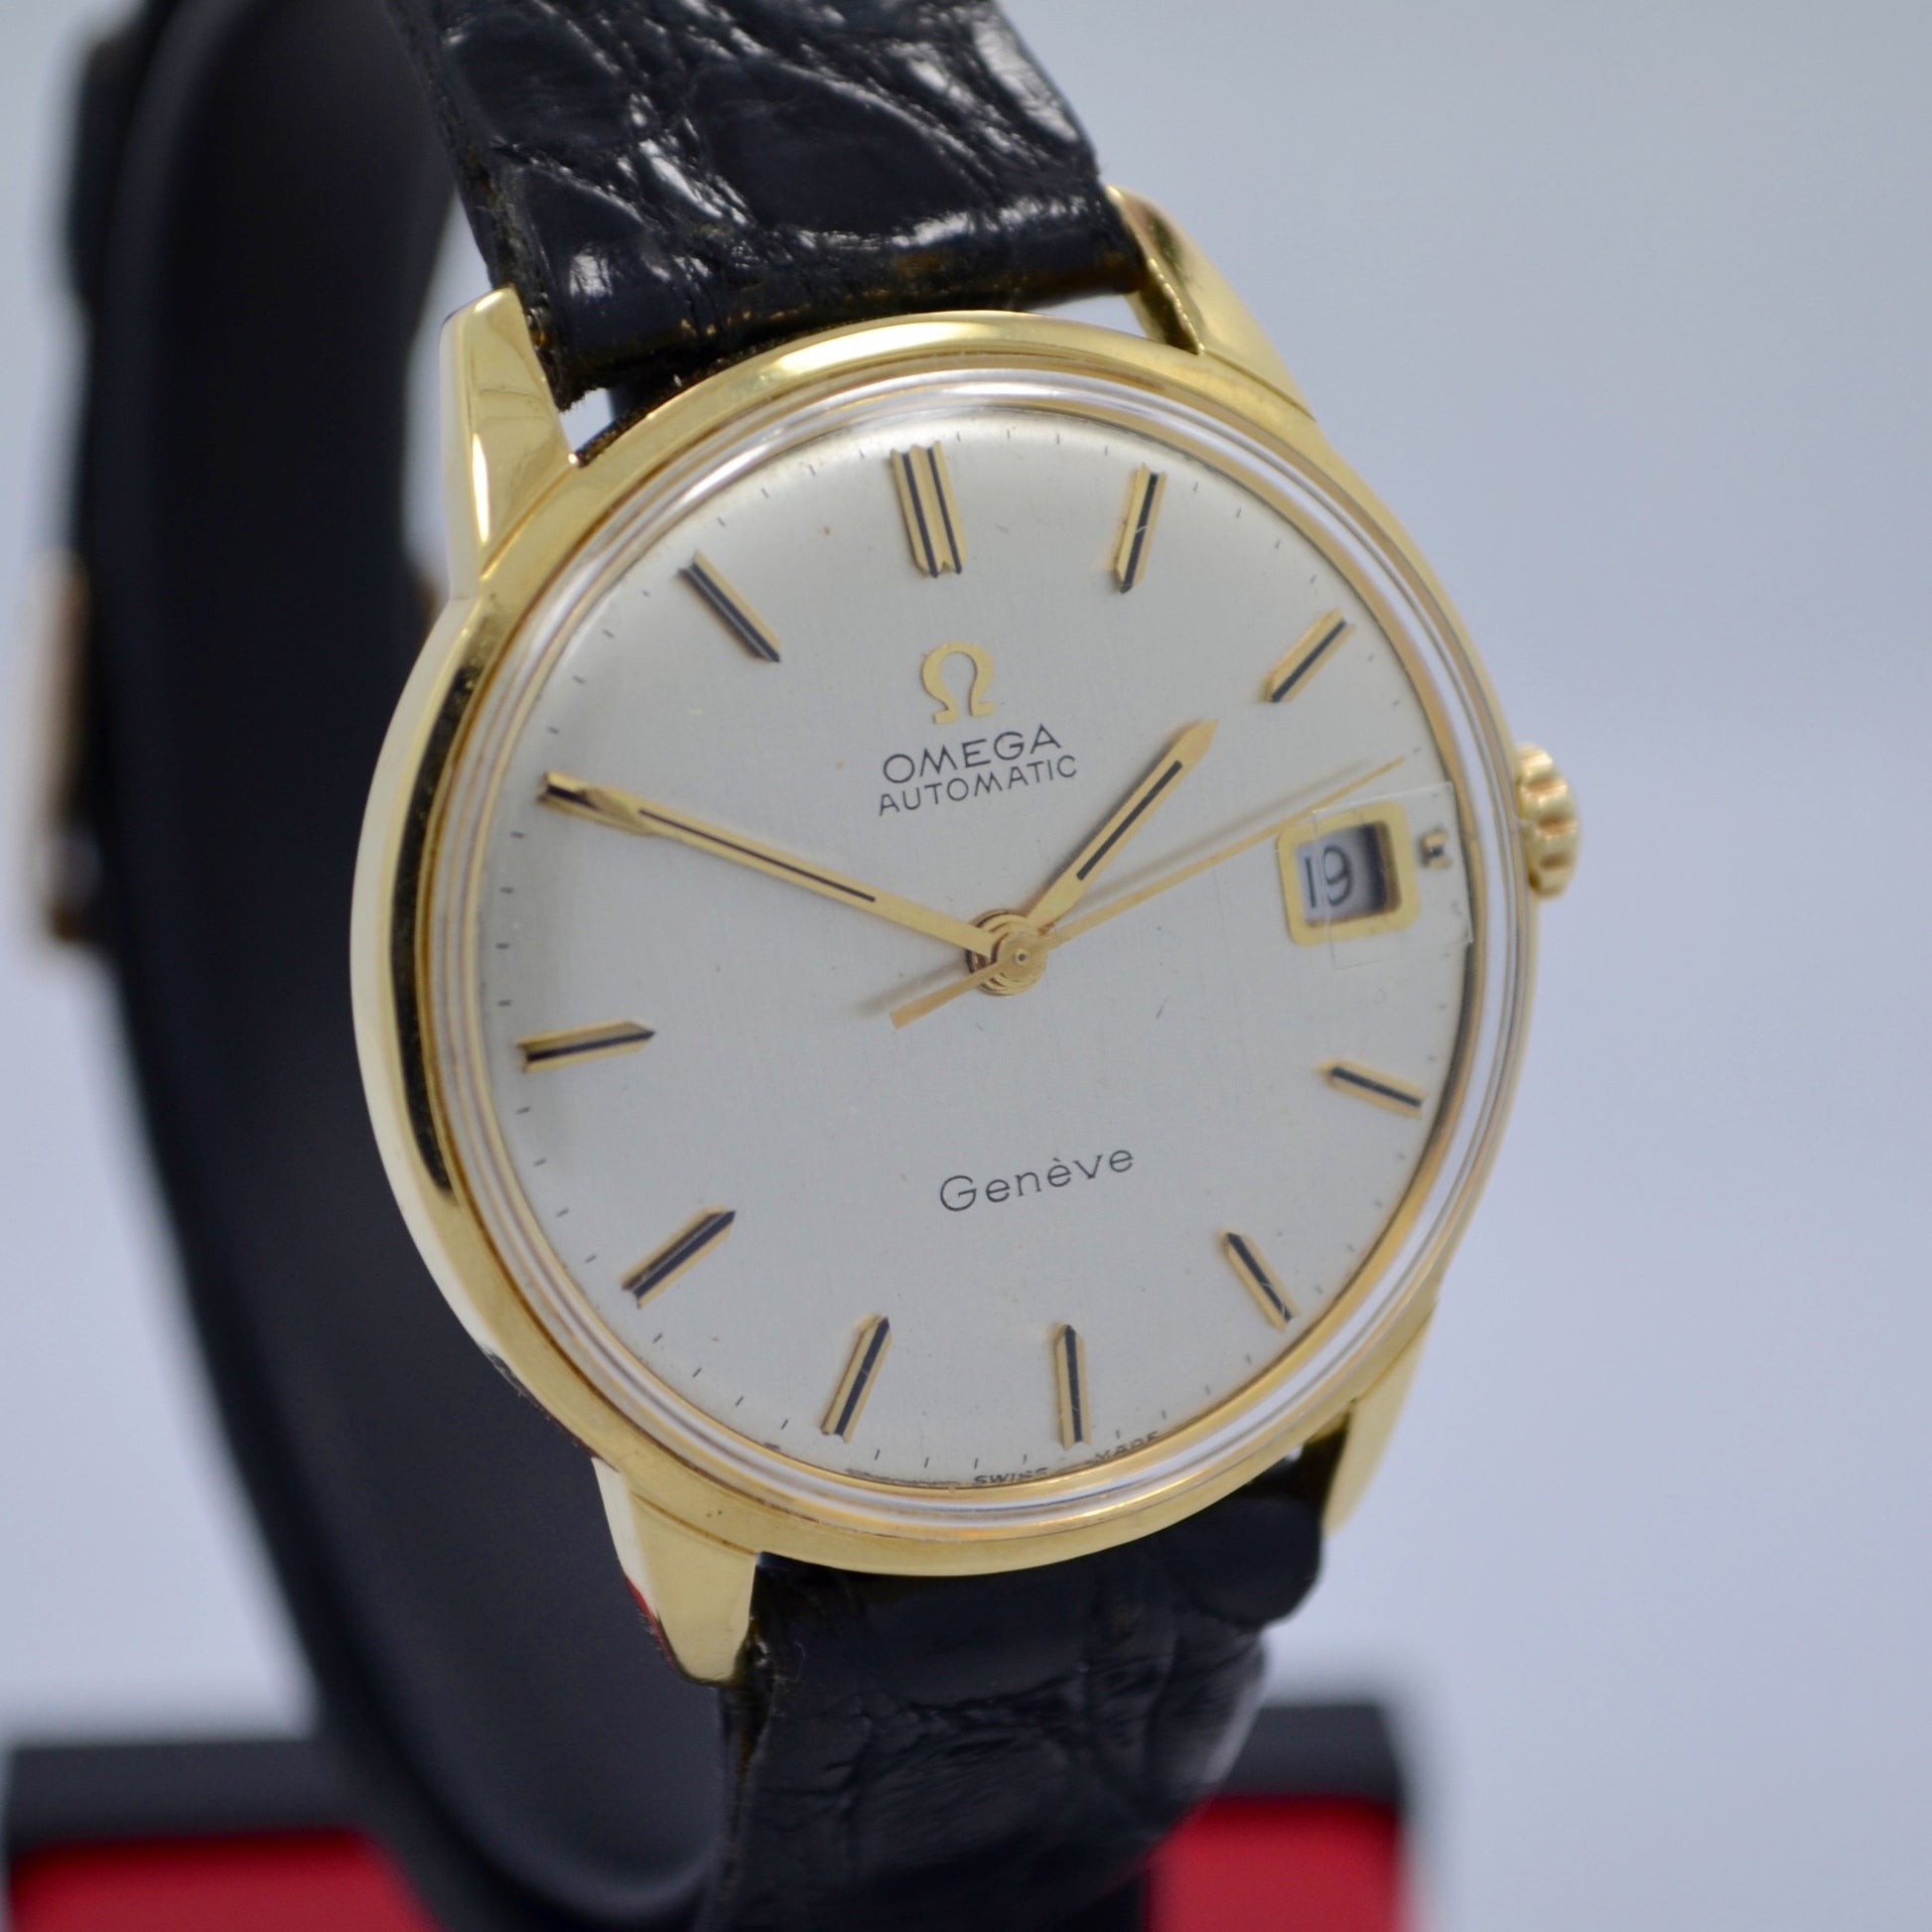 Vintage Omega Seamaster 166001 18K Solid Yellow Gold Cal. 565 Automatic Watch - Hashtag Watch Company